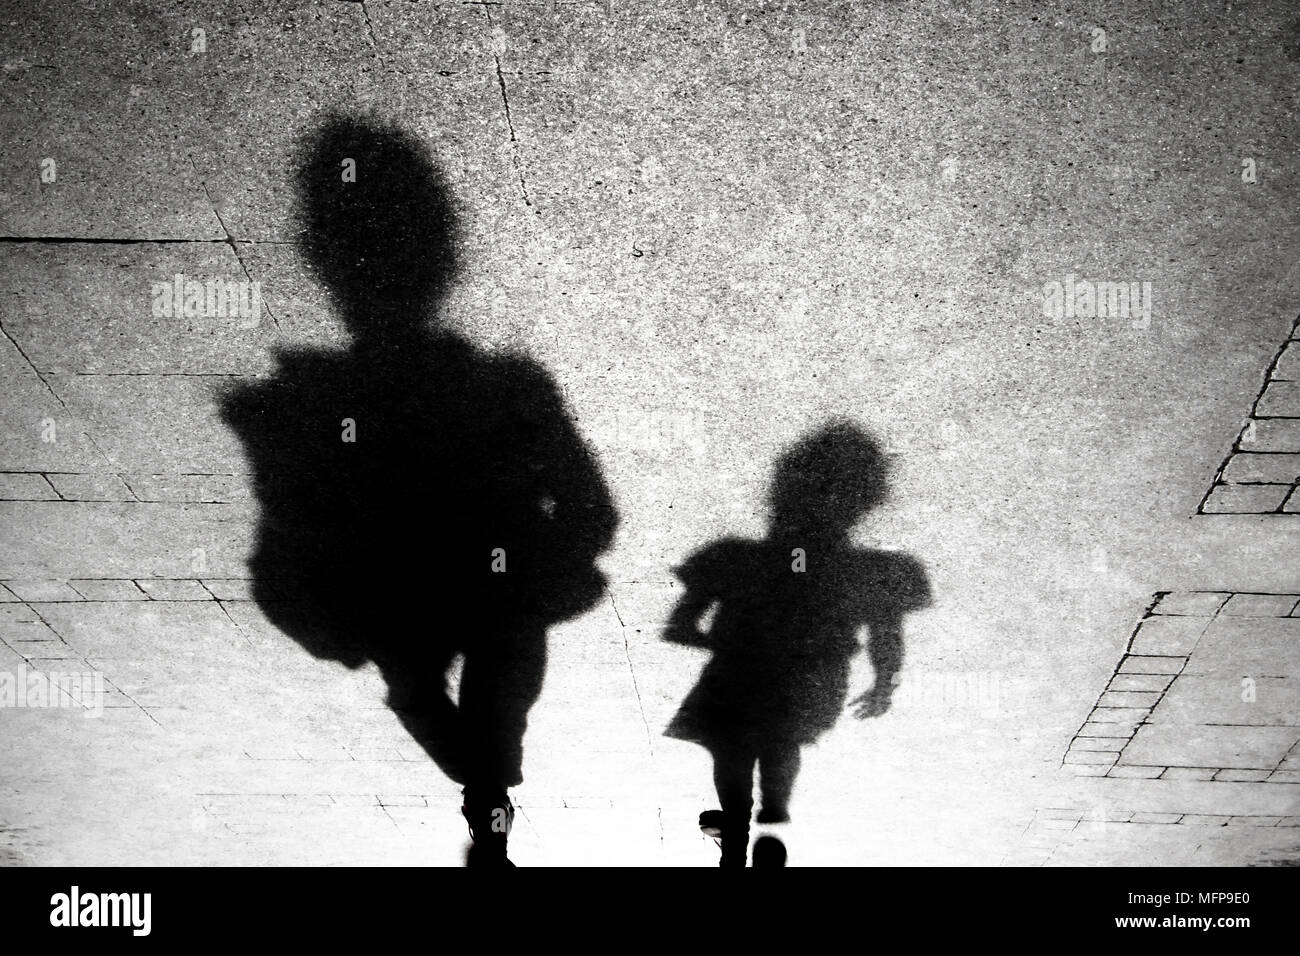 Shadow silhouette of an adult and a kid walking od the city sidewalk in  black and white Stock Photo